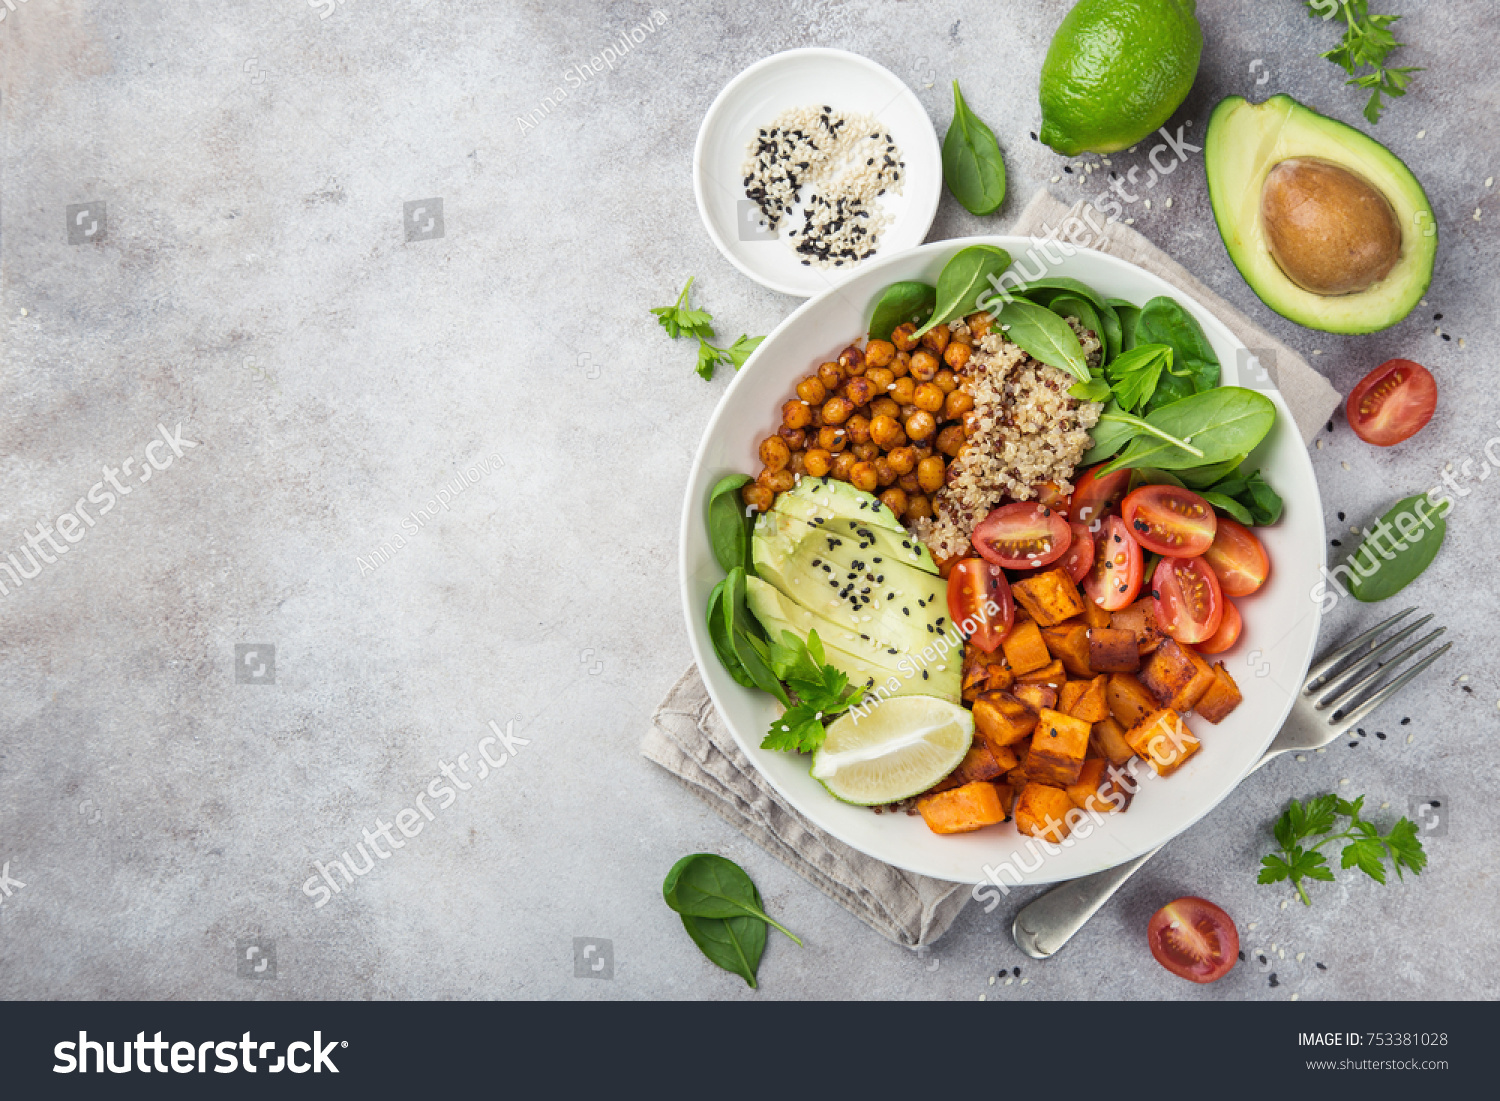 healhty vegan lunch bowl. Avocado, quinoa, sweet potato, tomato, spinach and chickpeas vegetables salad. Top view #753381028